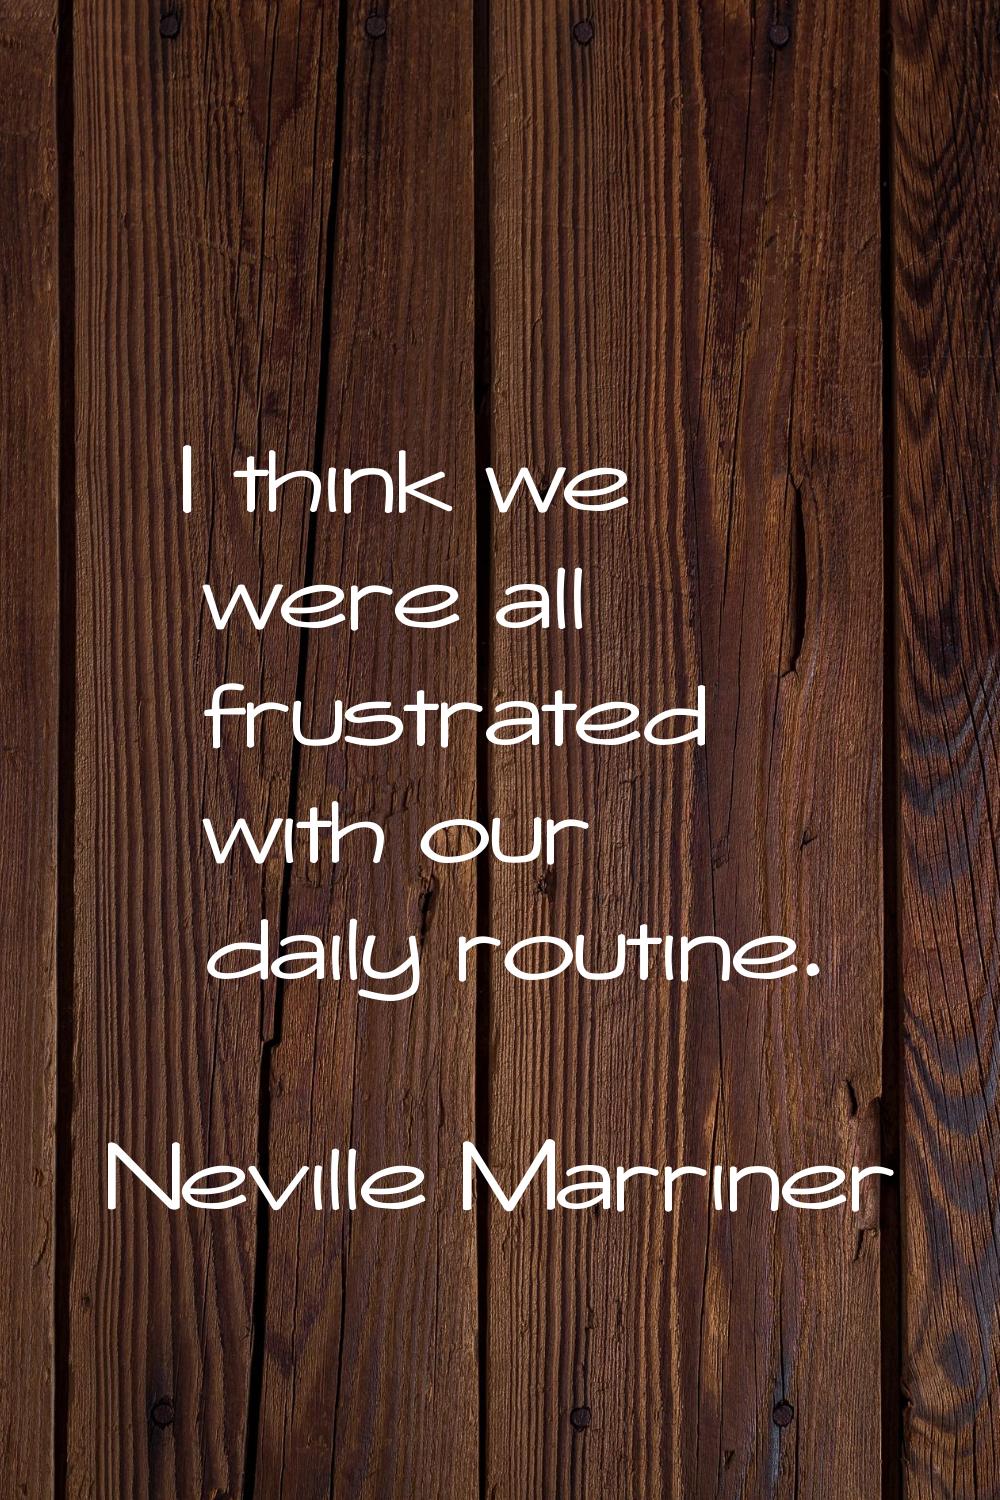 I think we were all frustrated with our daily routine.